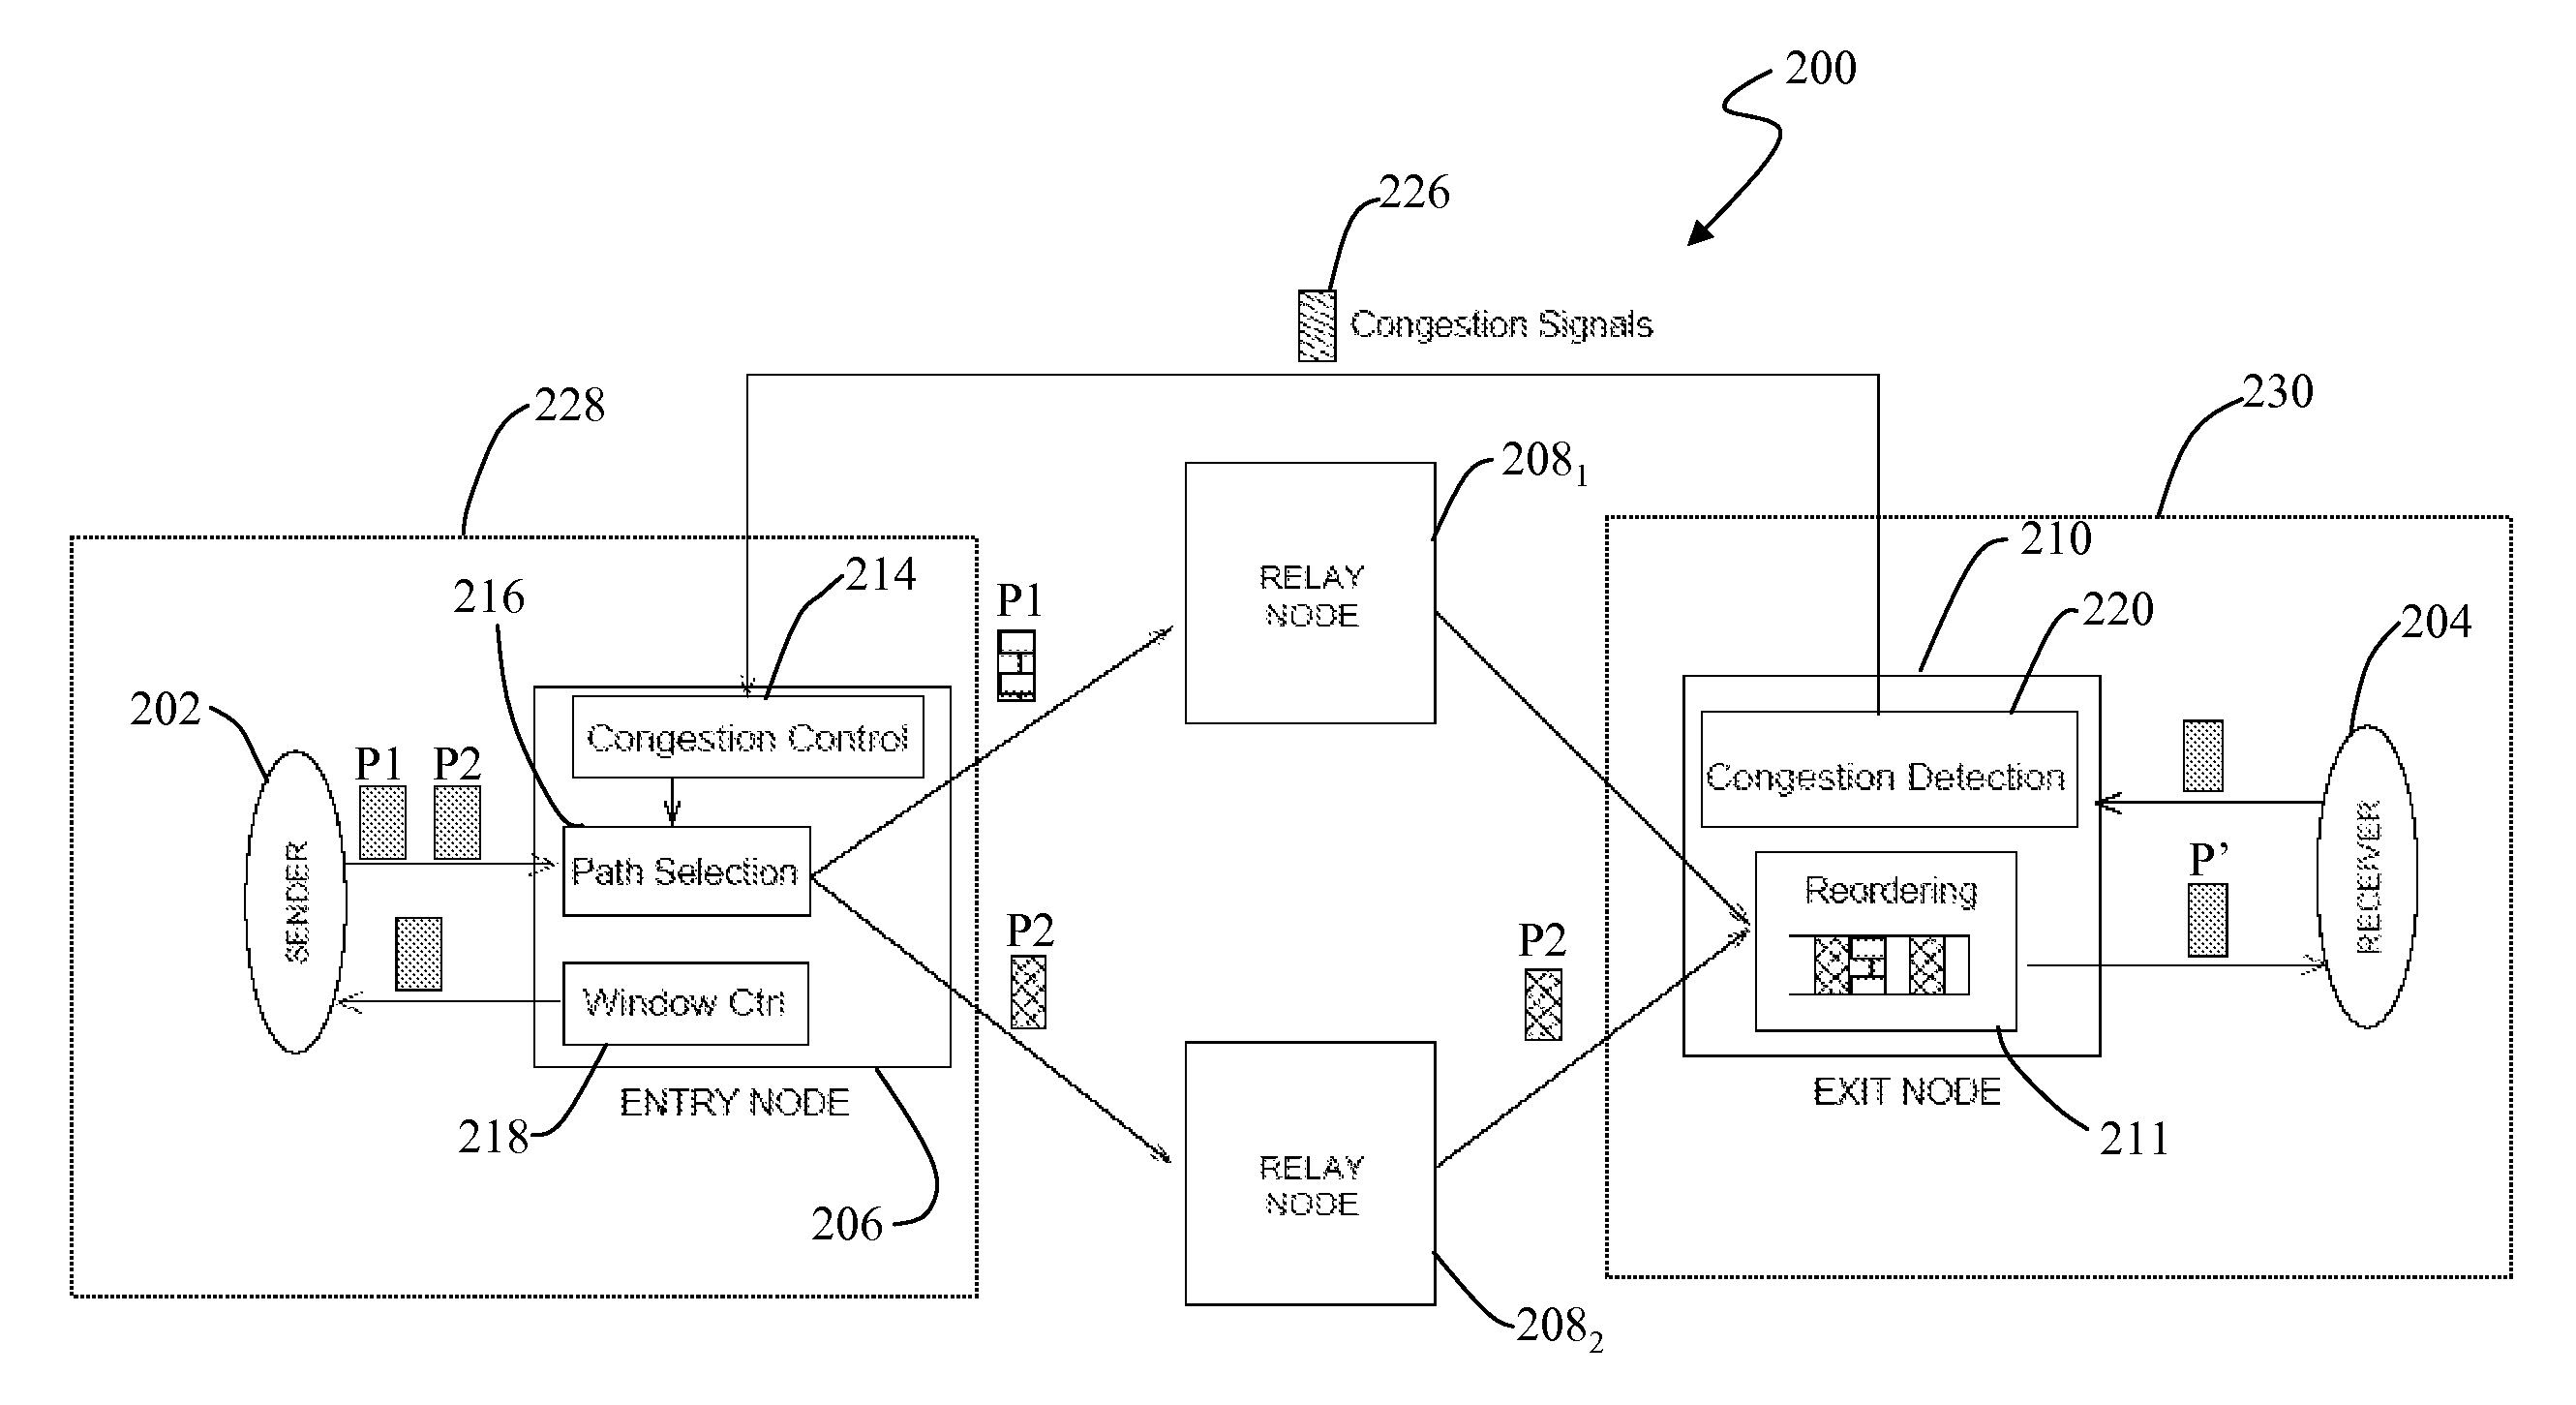 Multipath routing architecture for large data transfers